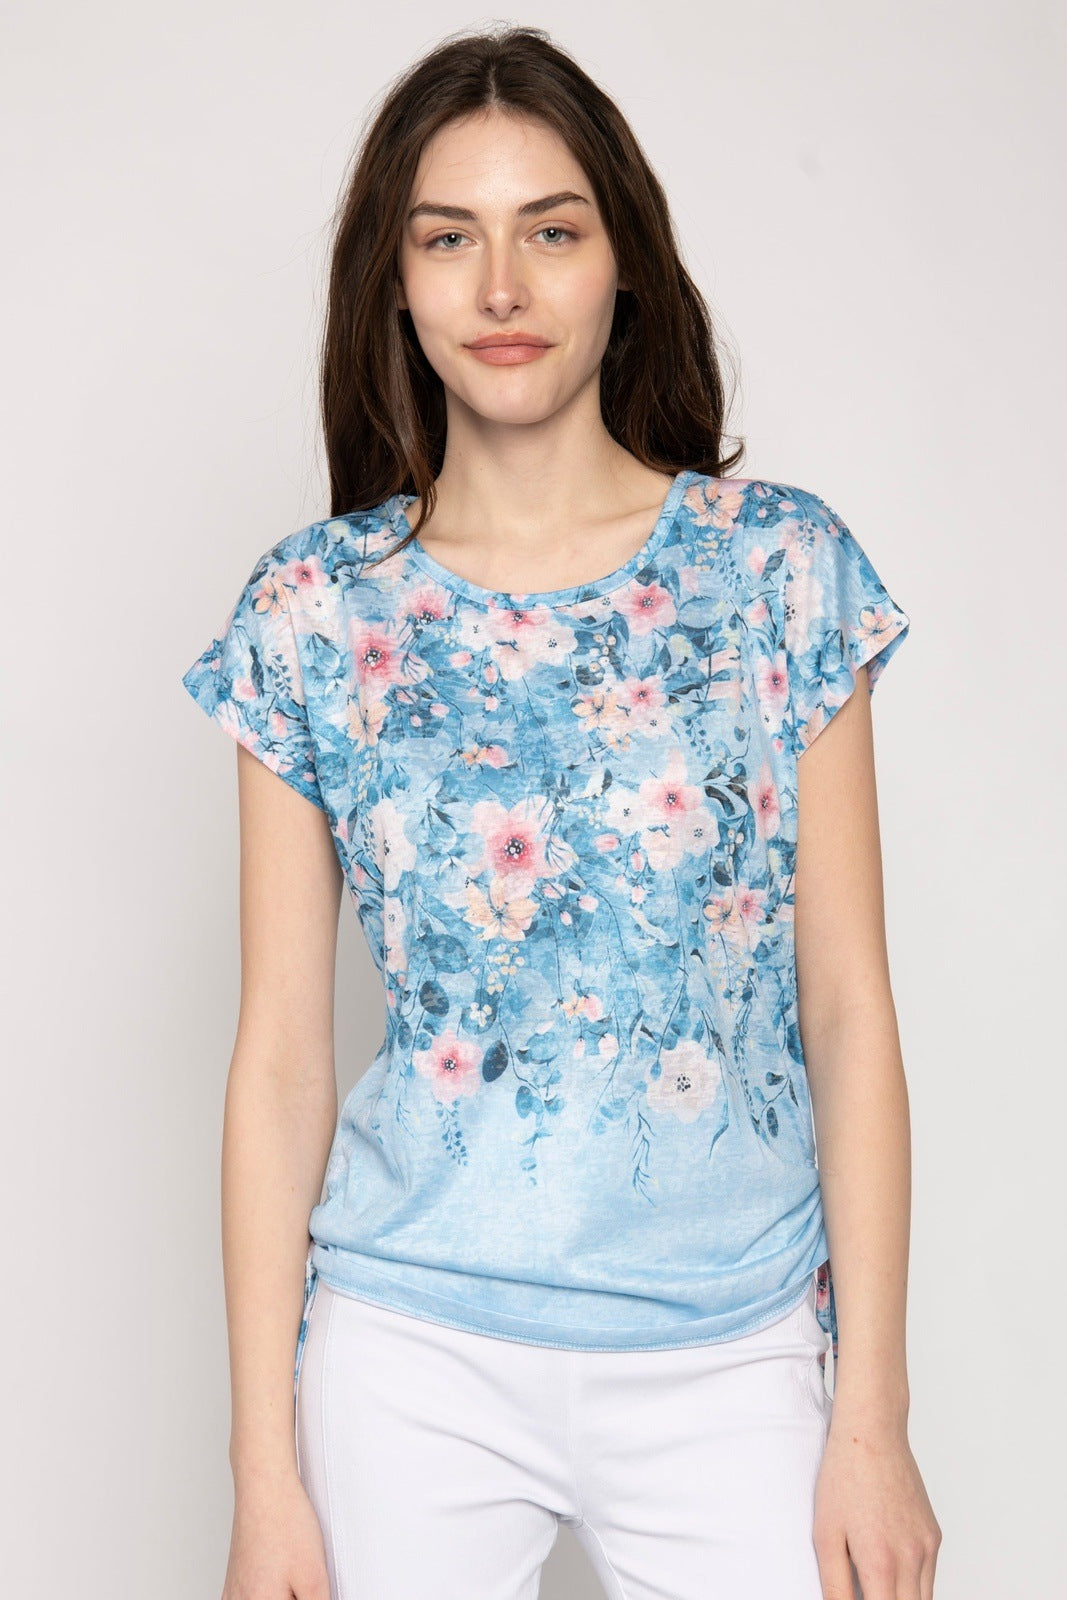 Tea Lane Foil Print T-Shirt With Ties At Base - Blue 1 Shaws Department Stores